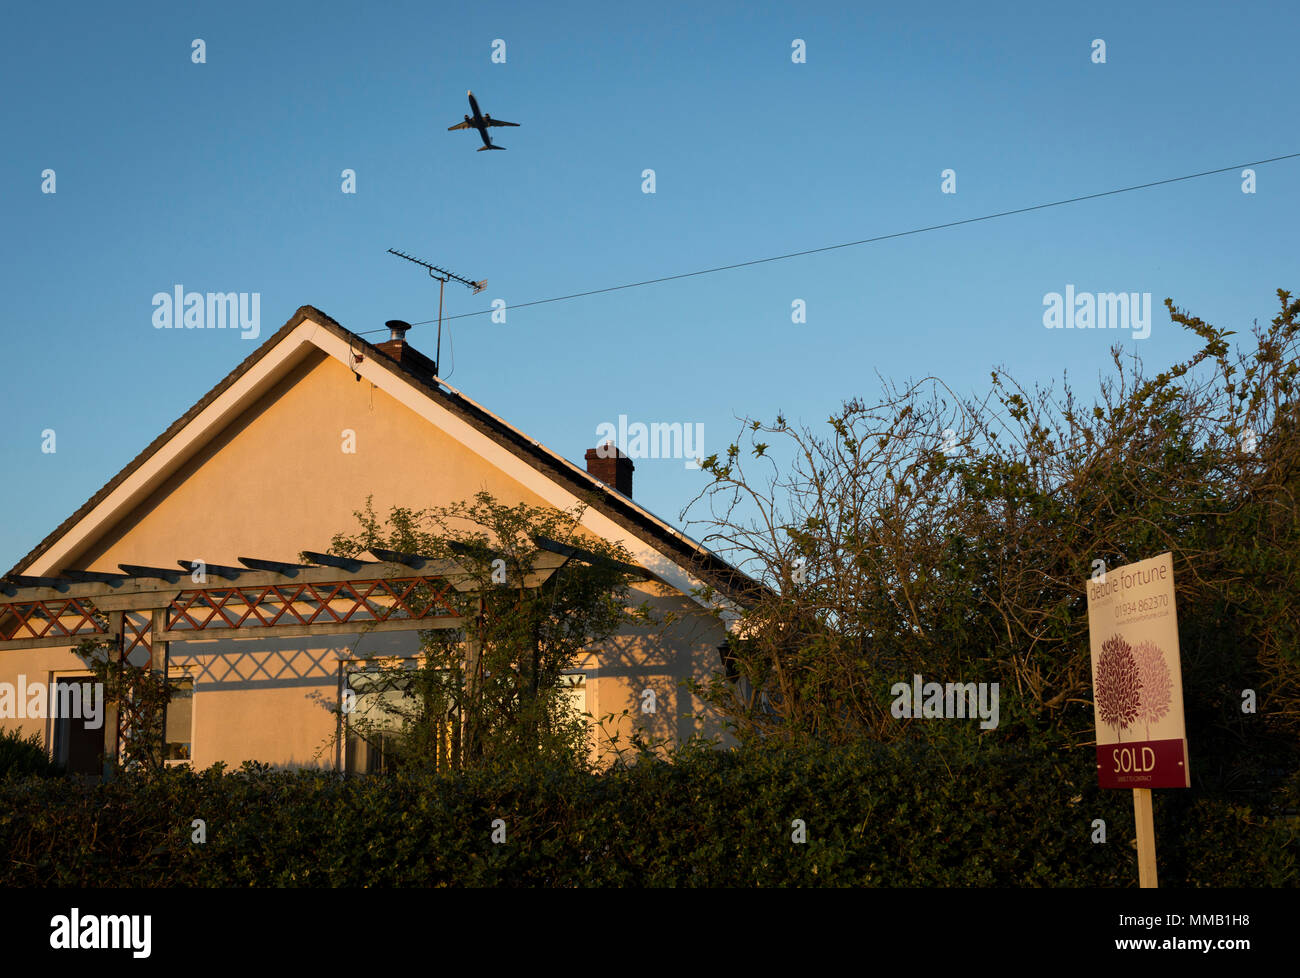 A jet airliner departing from nearby Bristol airport takes-off from a rural bungalow, recently sold by a local north Somerset estate agency, on 5th May 2018, in Wrington, North Somerset, England. Stock Photo